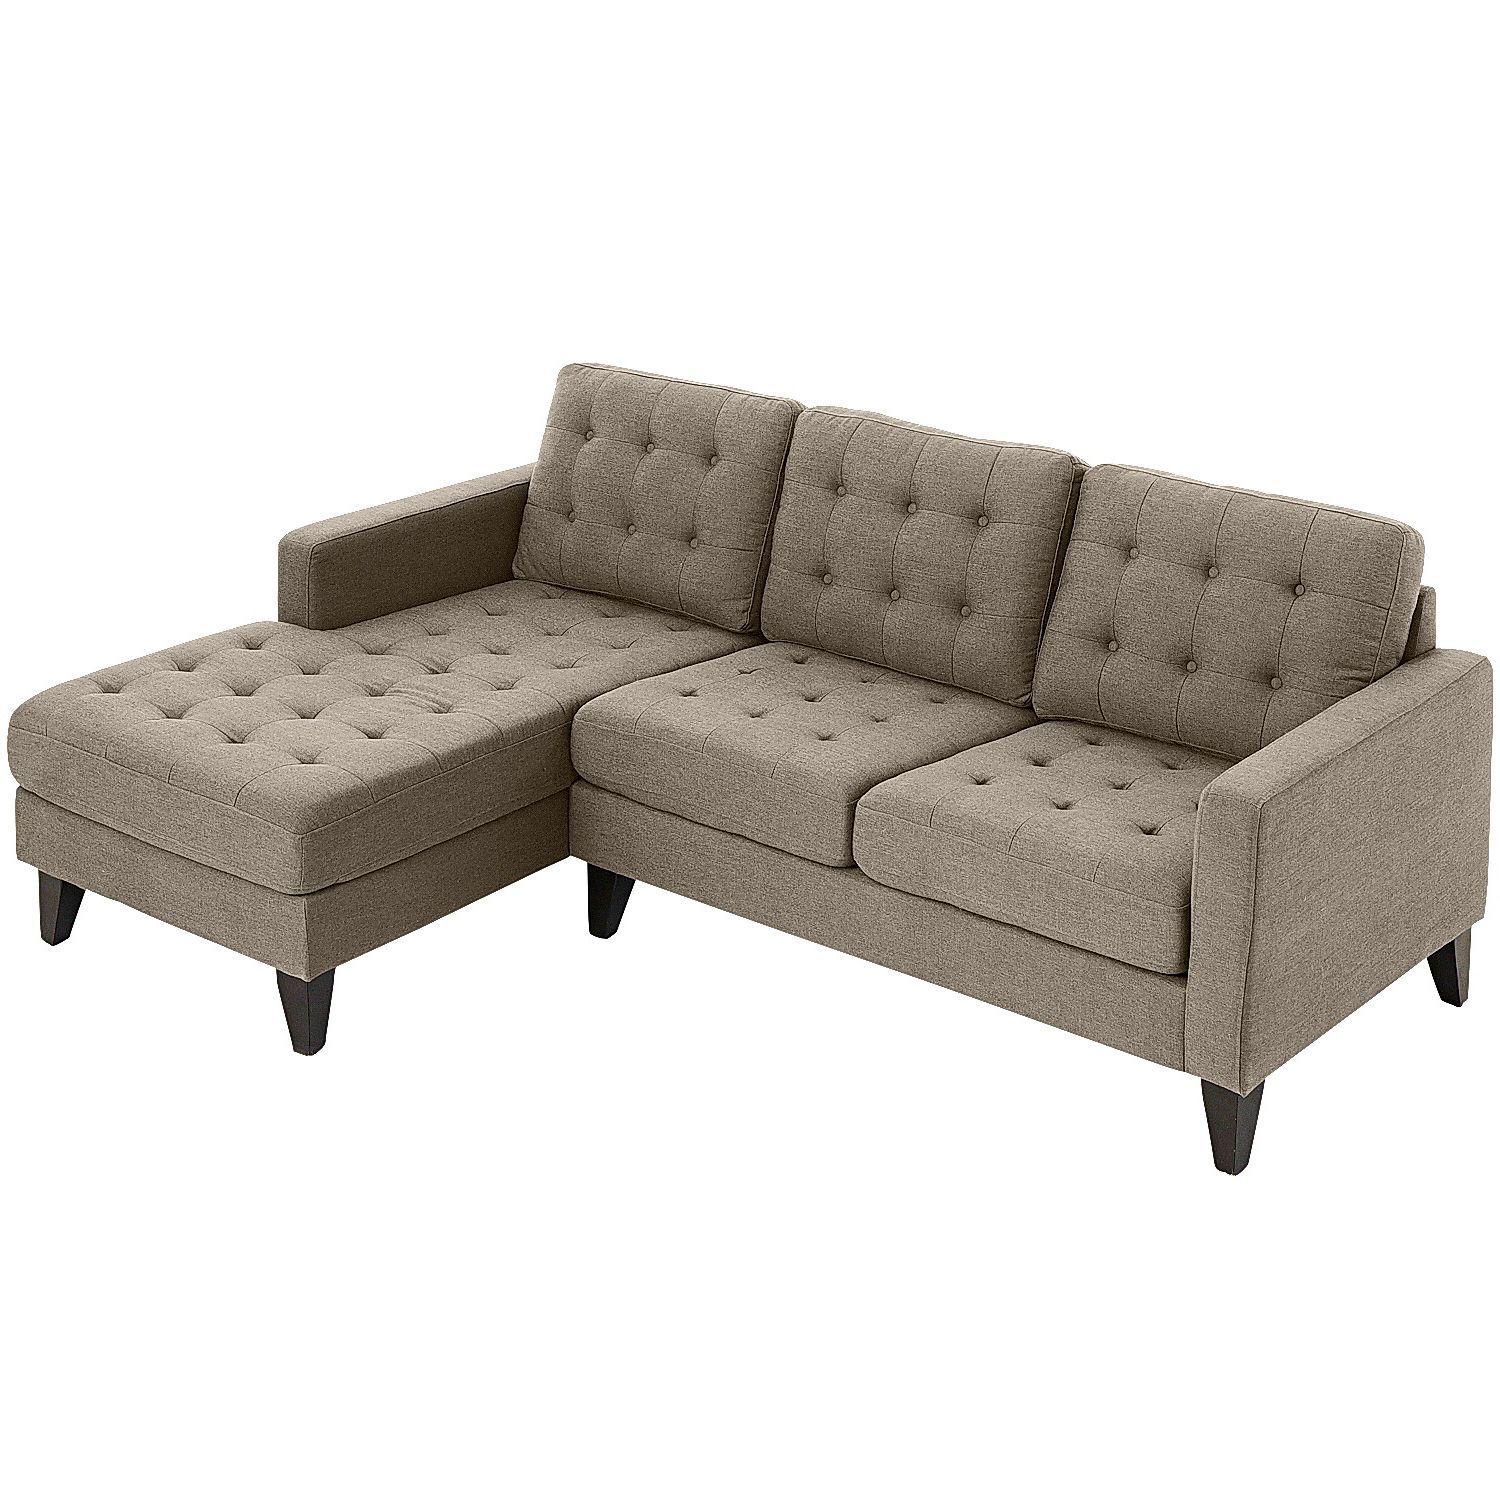 Nyle Putty 2 Piece Left Arm Chaise Sectional | Living Room With Regard To Element Left Side Chaise Sectional Sofas In Dark Gray Linen And Walnut Legs (View 7 of 15)